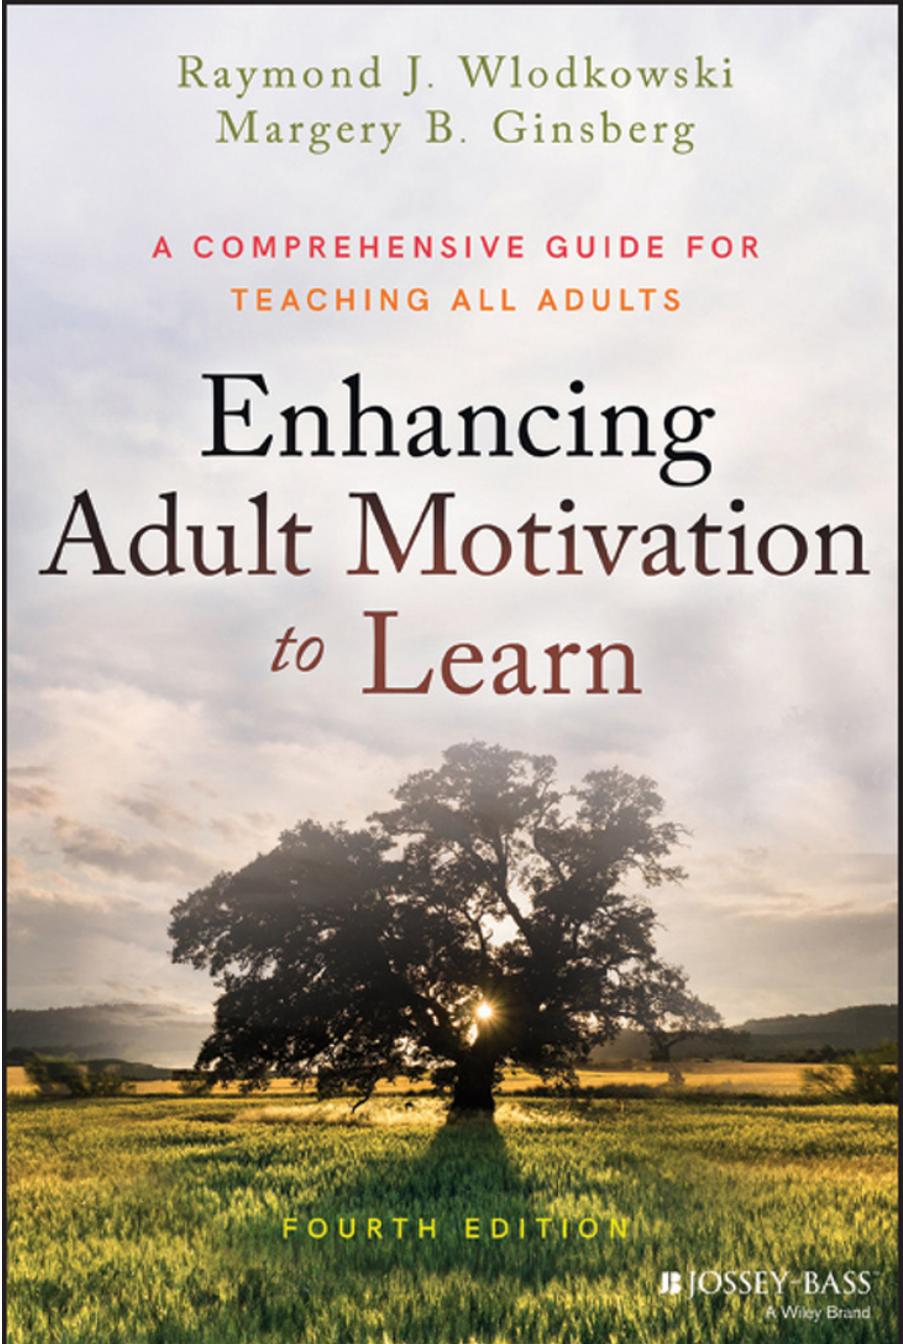 (eBook PDF)Enhancing Adult Motivation to Learn: A Comprehensive Guide for Teaching All Adults 4th Edition by Margery B. Ginsberg,Raymond J. Wlodkowski